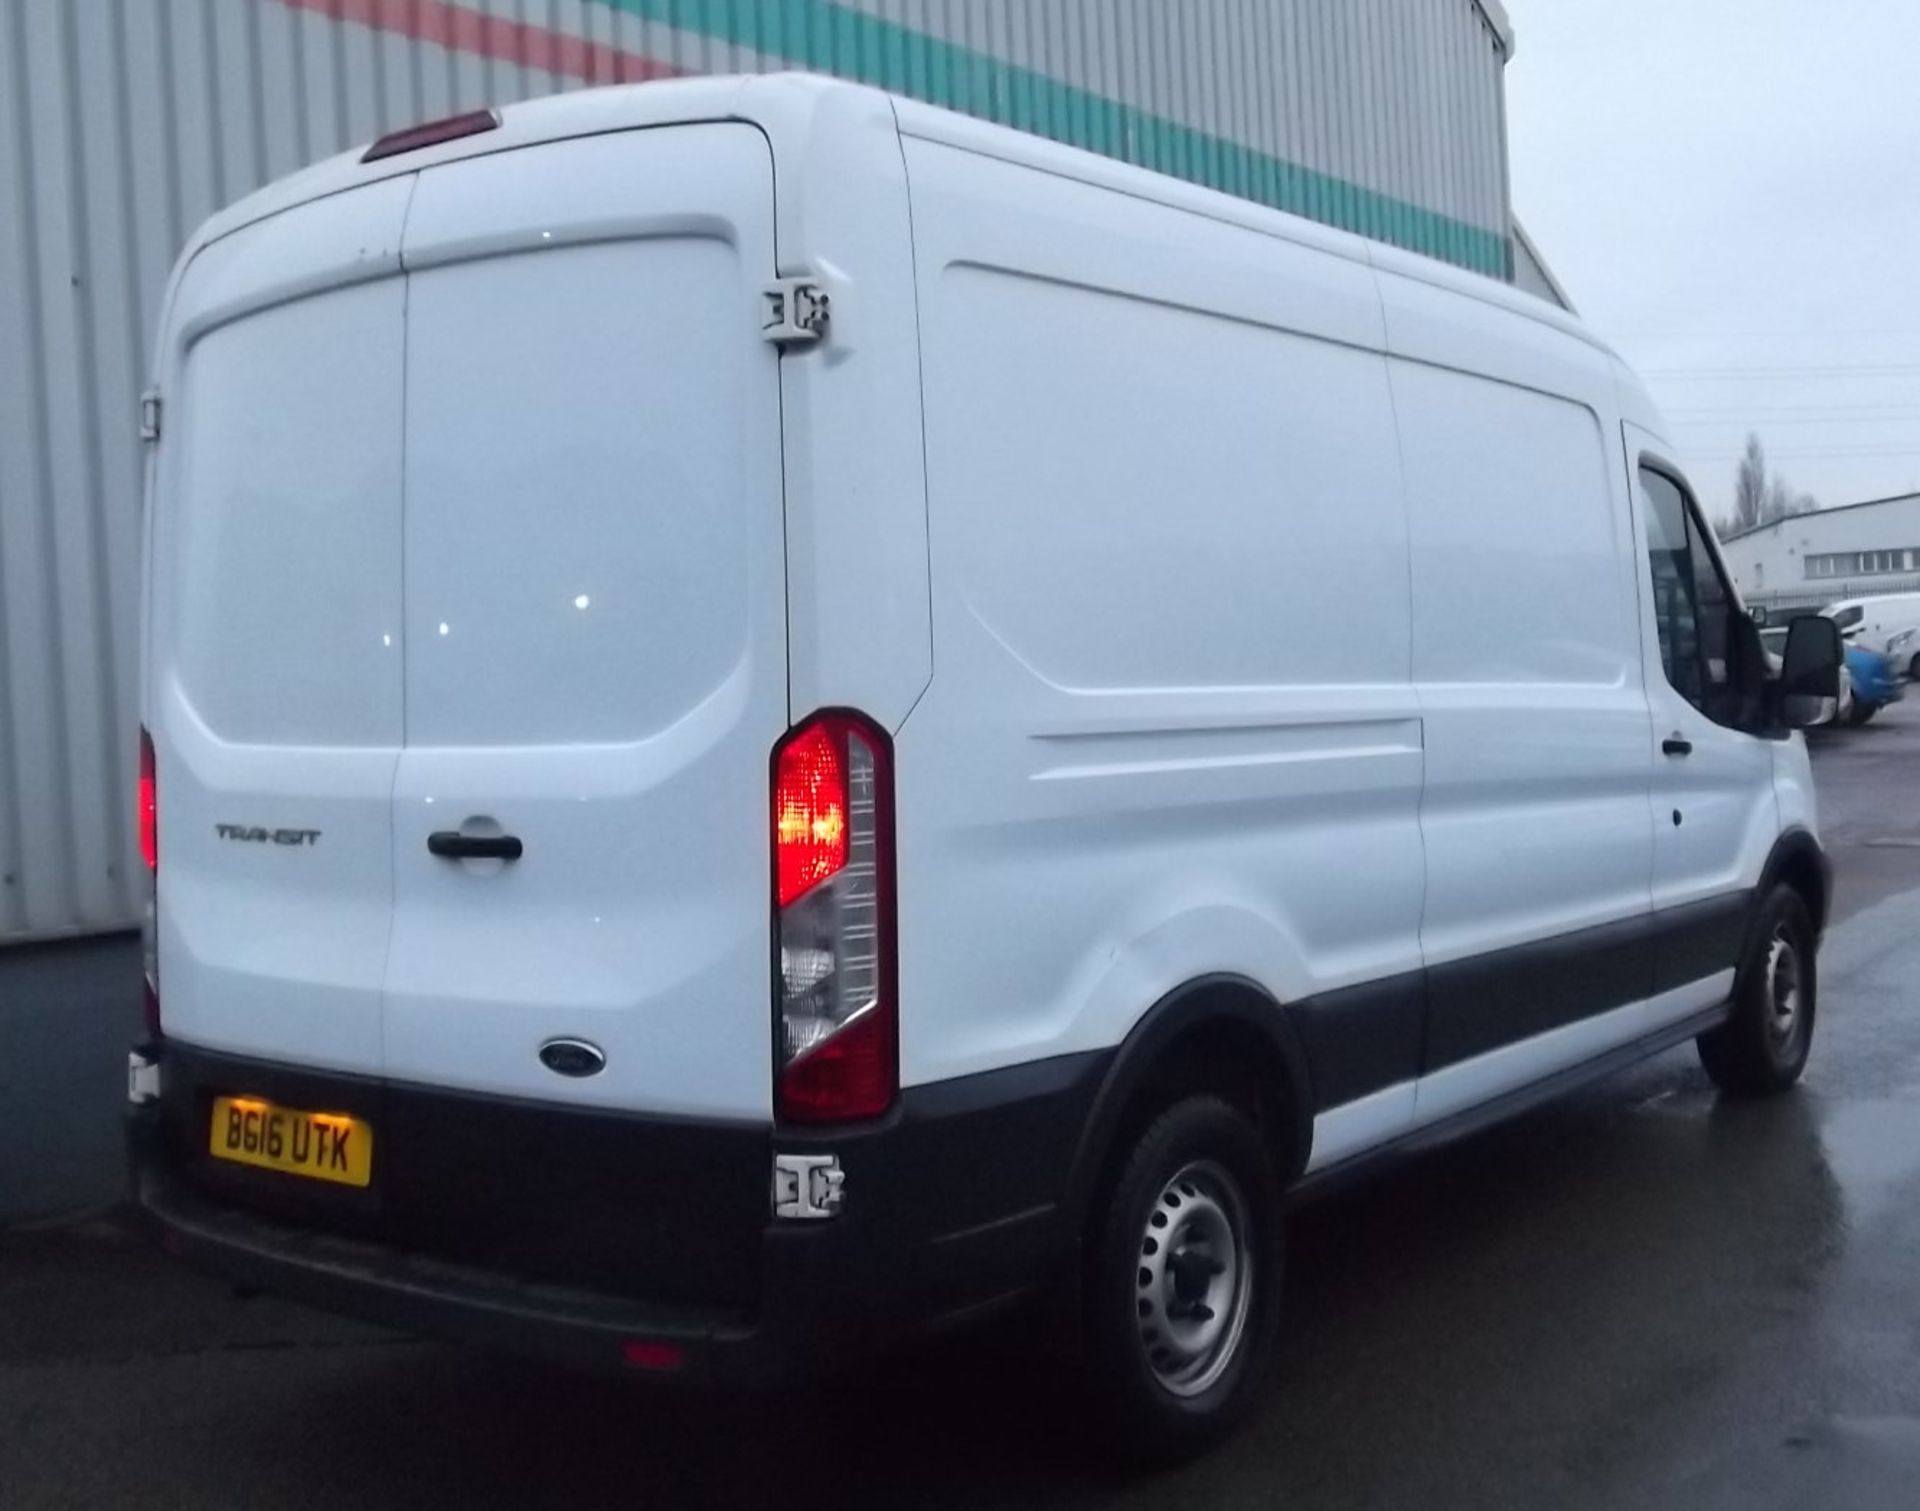 2016 Ford Transit 350 2.2 TDCi 125ps H2L3 Panel Van - CL505 - Location: Corby, Northamptonshire - Image 8 of 15